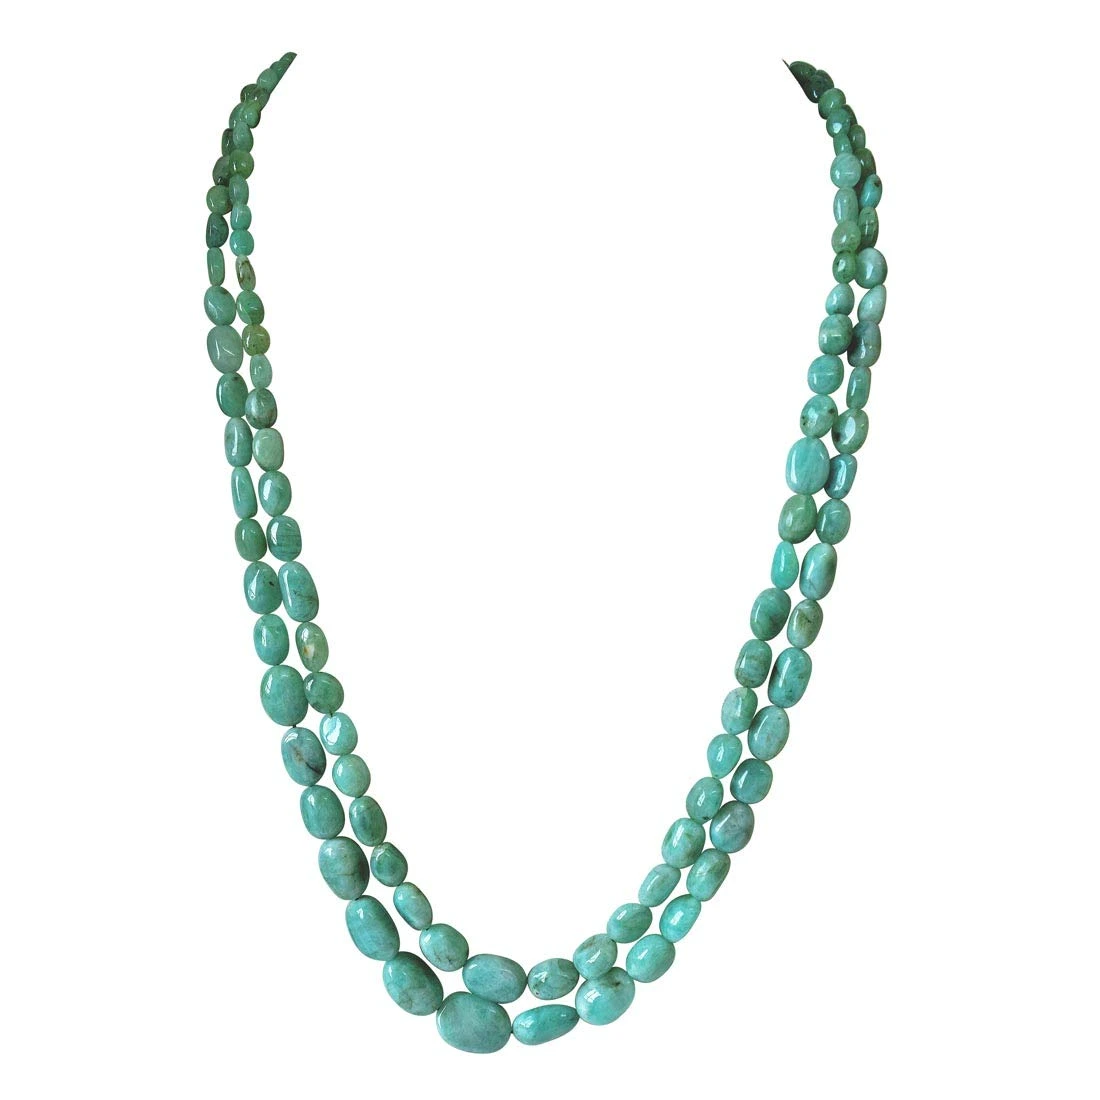 Two Line 274.48cts REAL Natural Light Greenish Oval Emerald Necklace for Women (274.48cts EMR Neck)